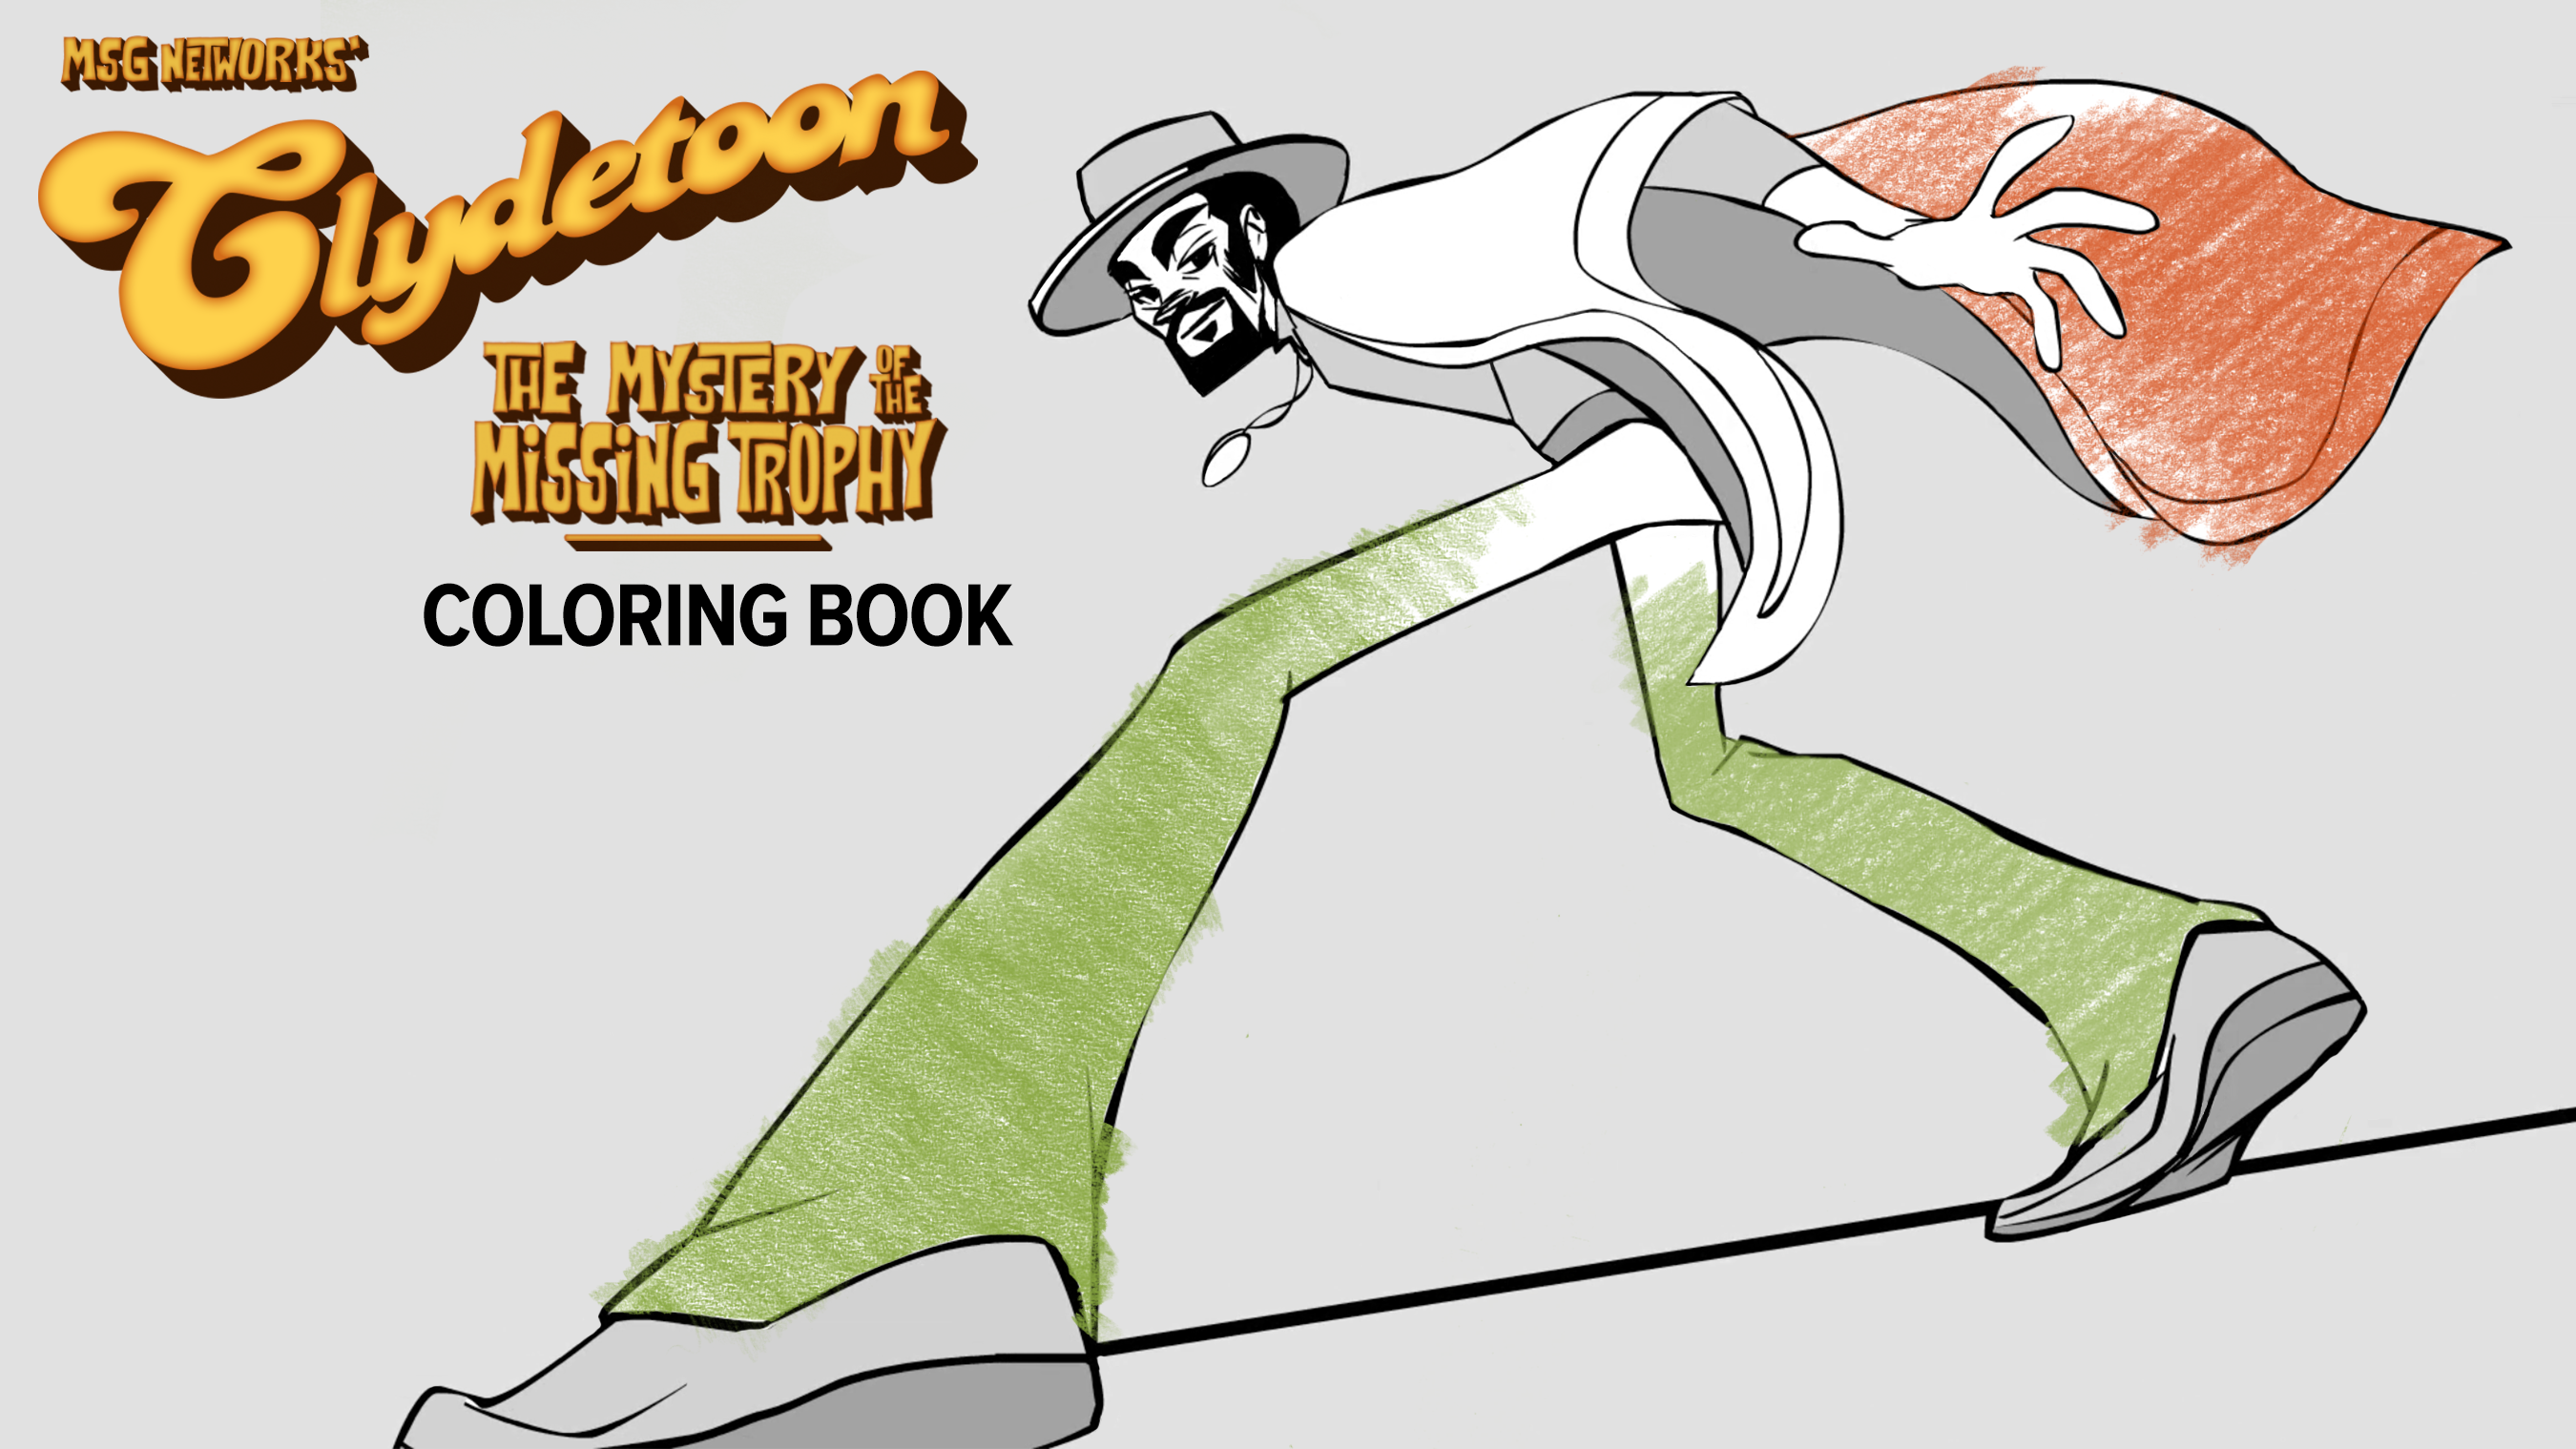 Clydetoon Coloring Book Cover